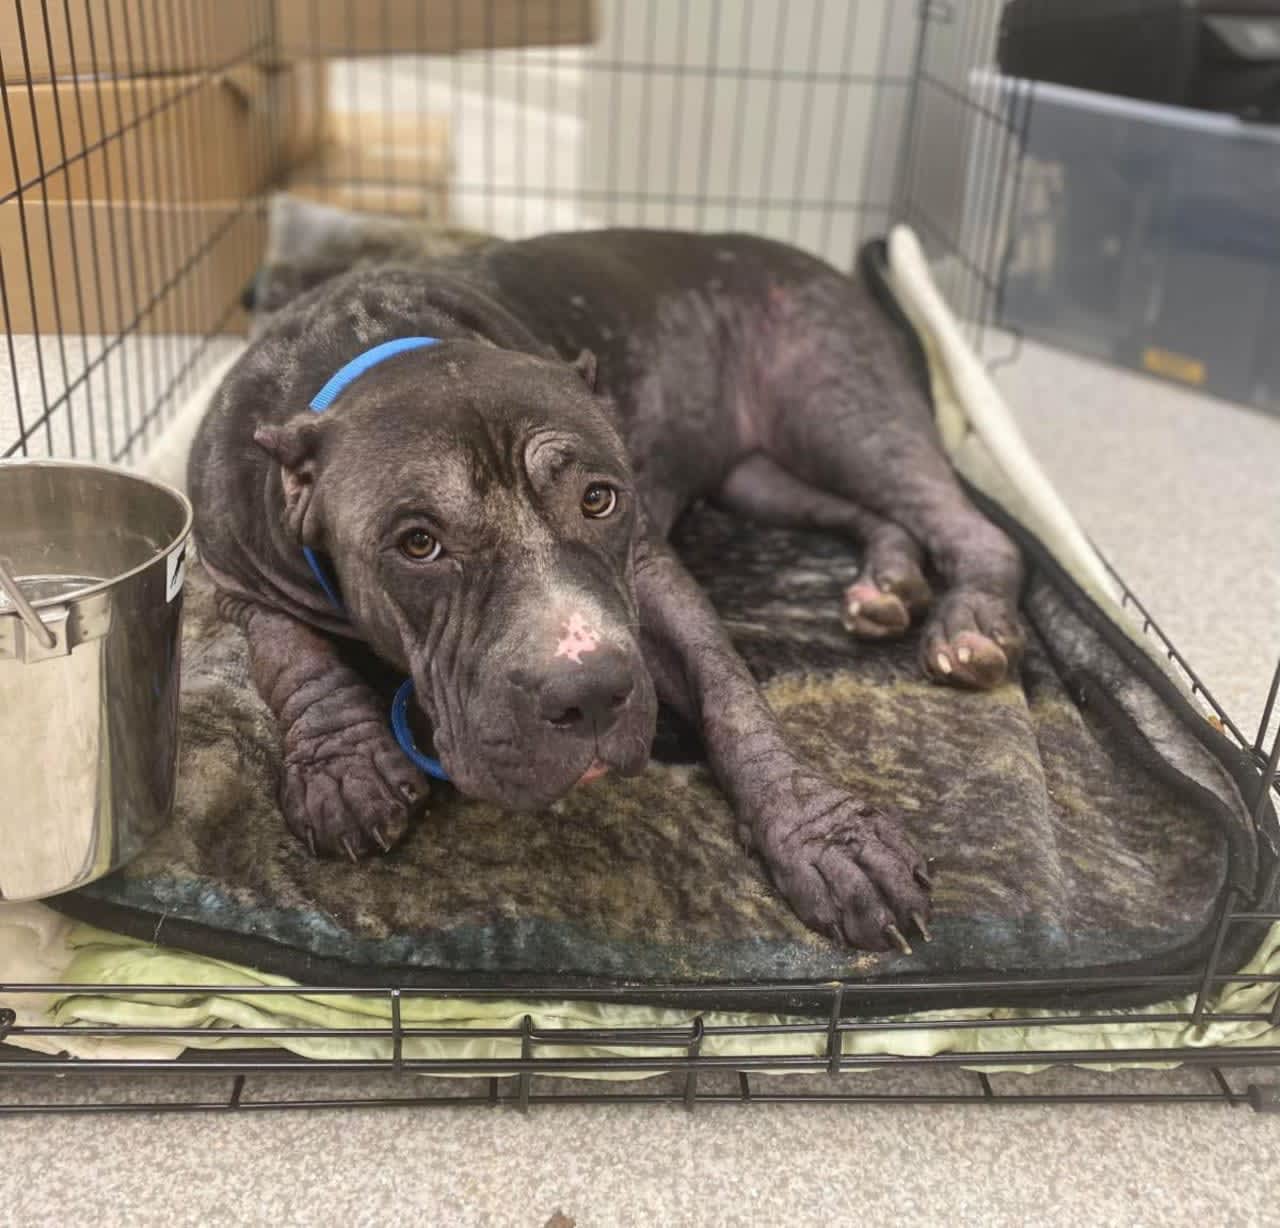 Car-Struck Pup Left For Dead Gets Much-Needed TLC From Baltimore Rescuers |  Baltimore Daily Voice